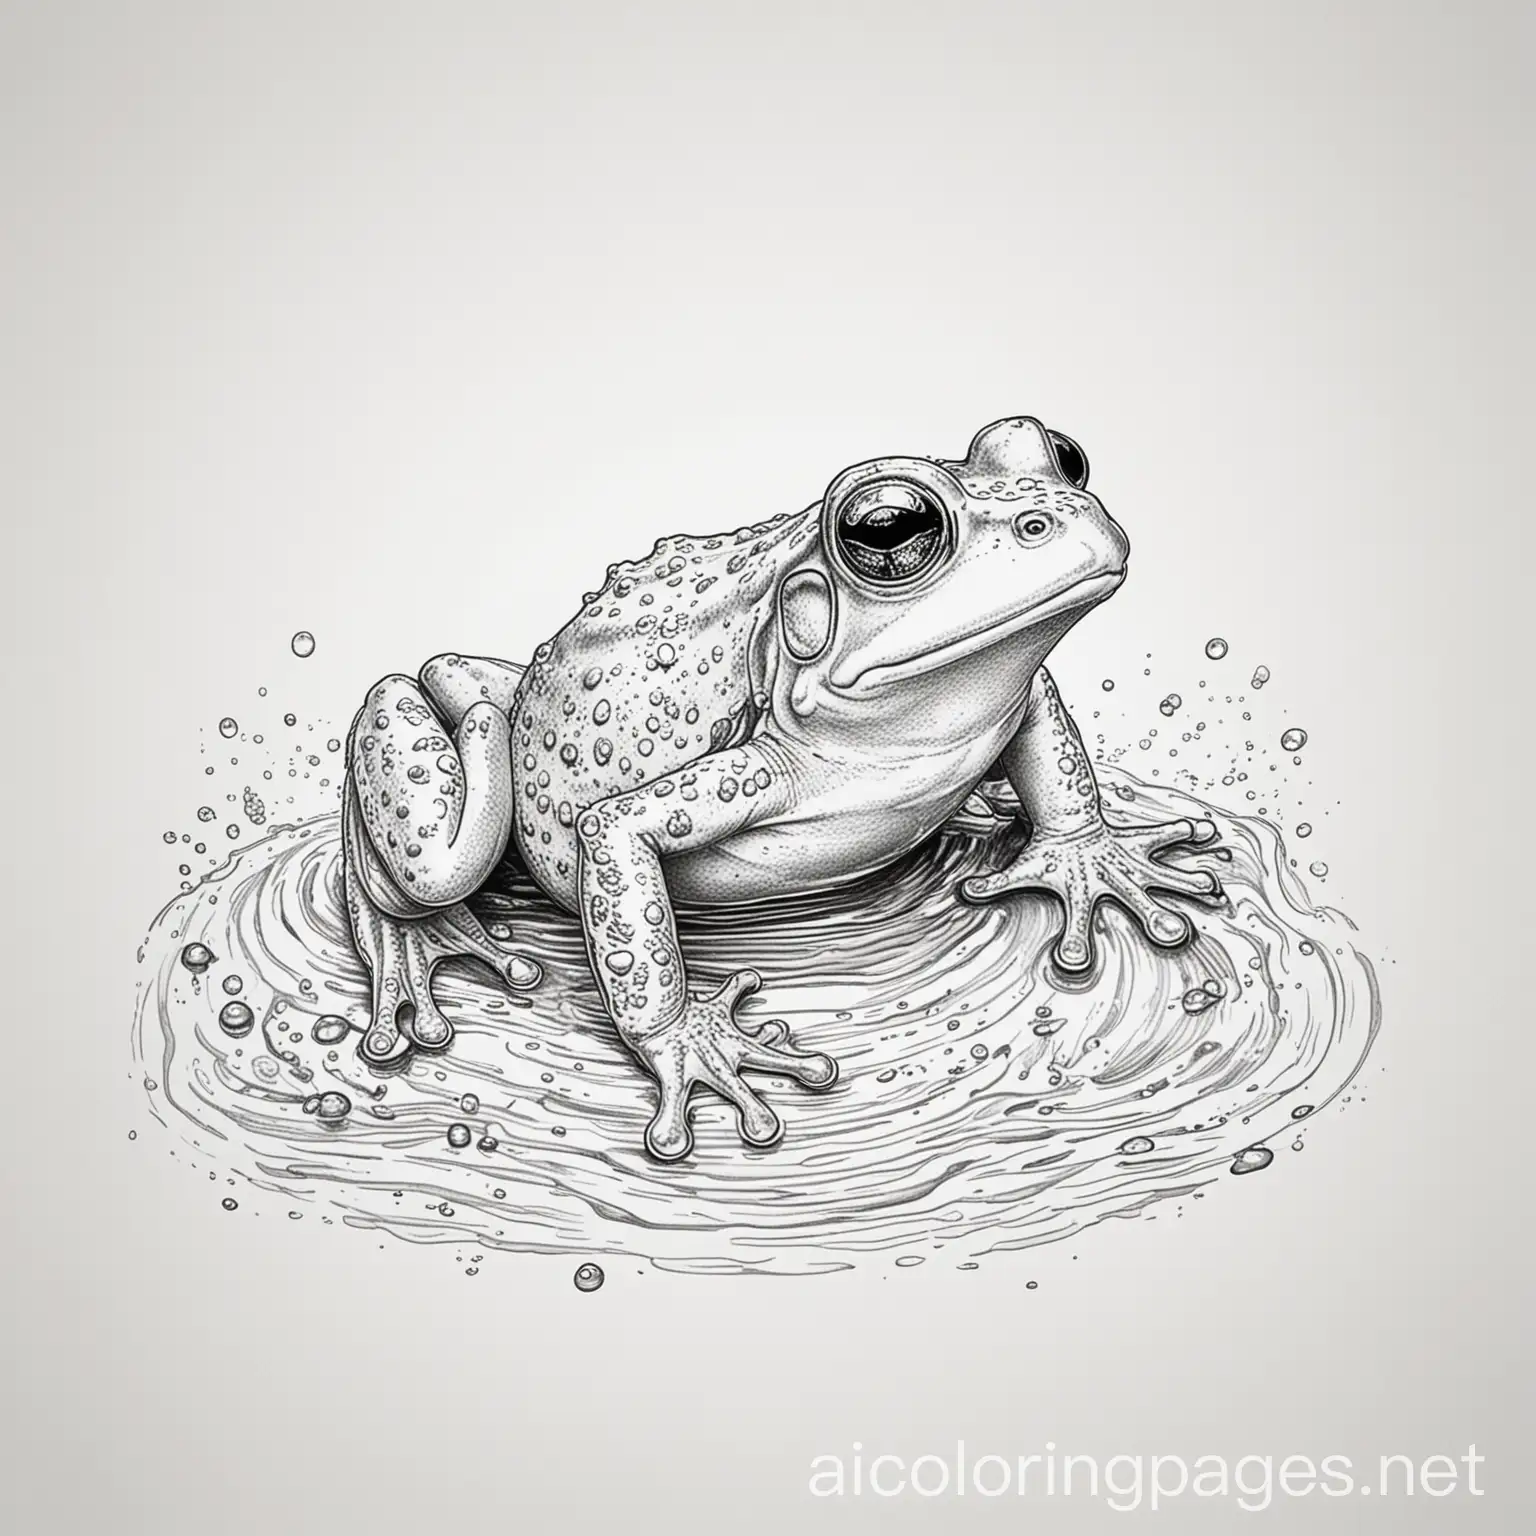 Simple-Black-and-White-Frog-Swimming-Coloring-Page